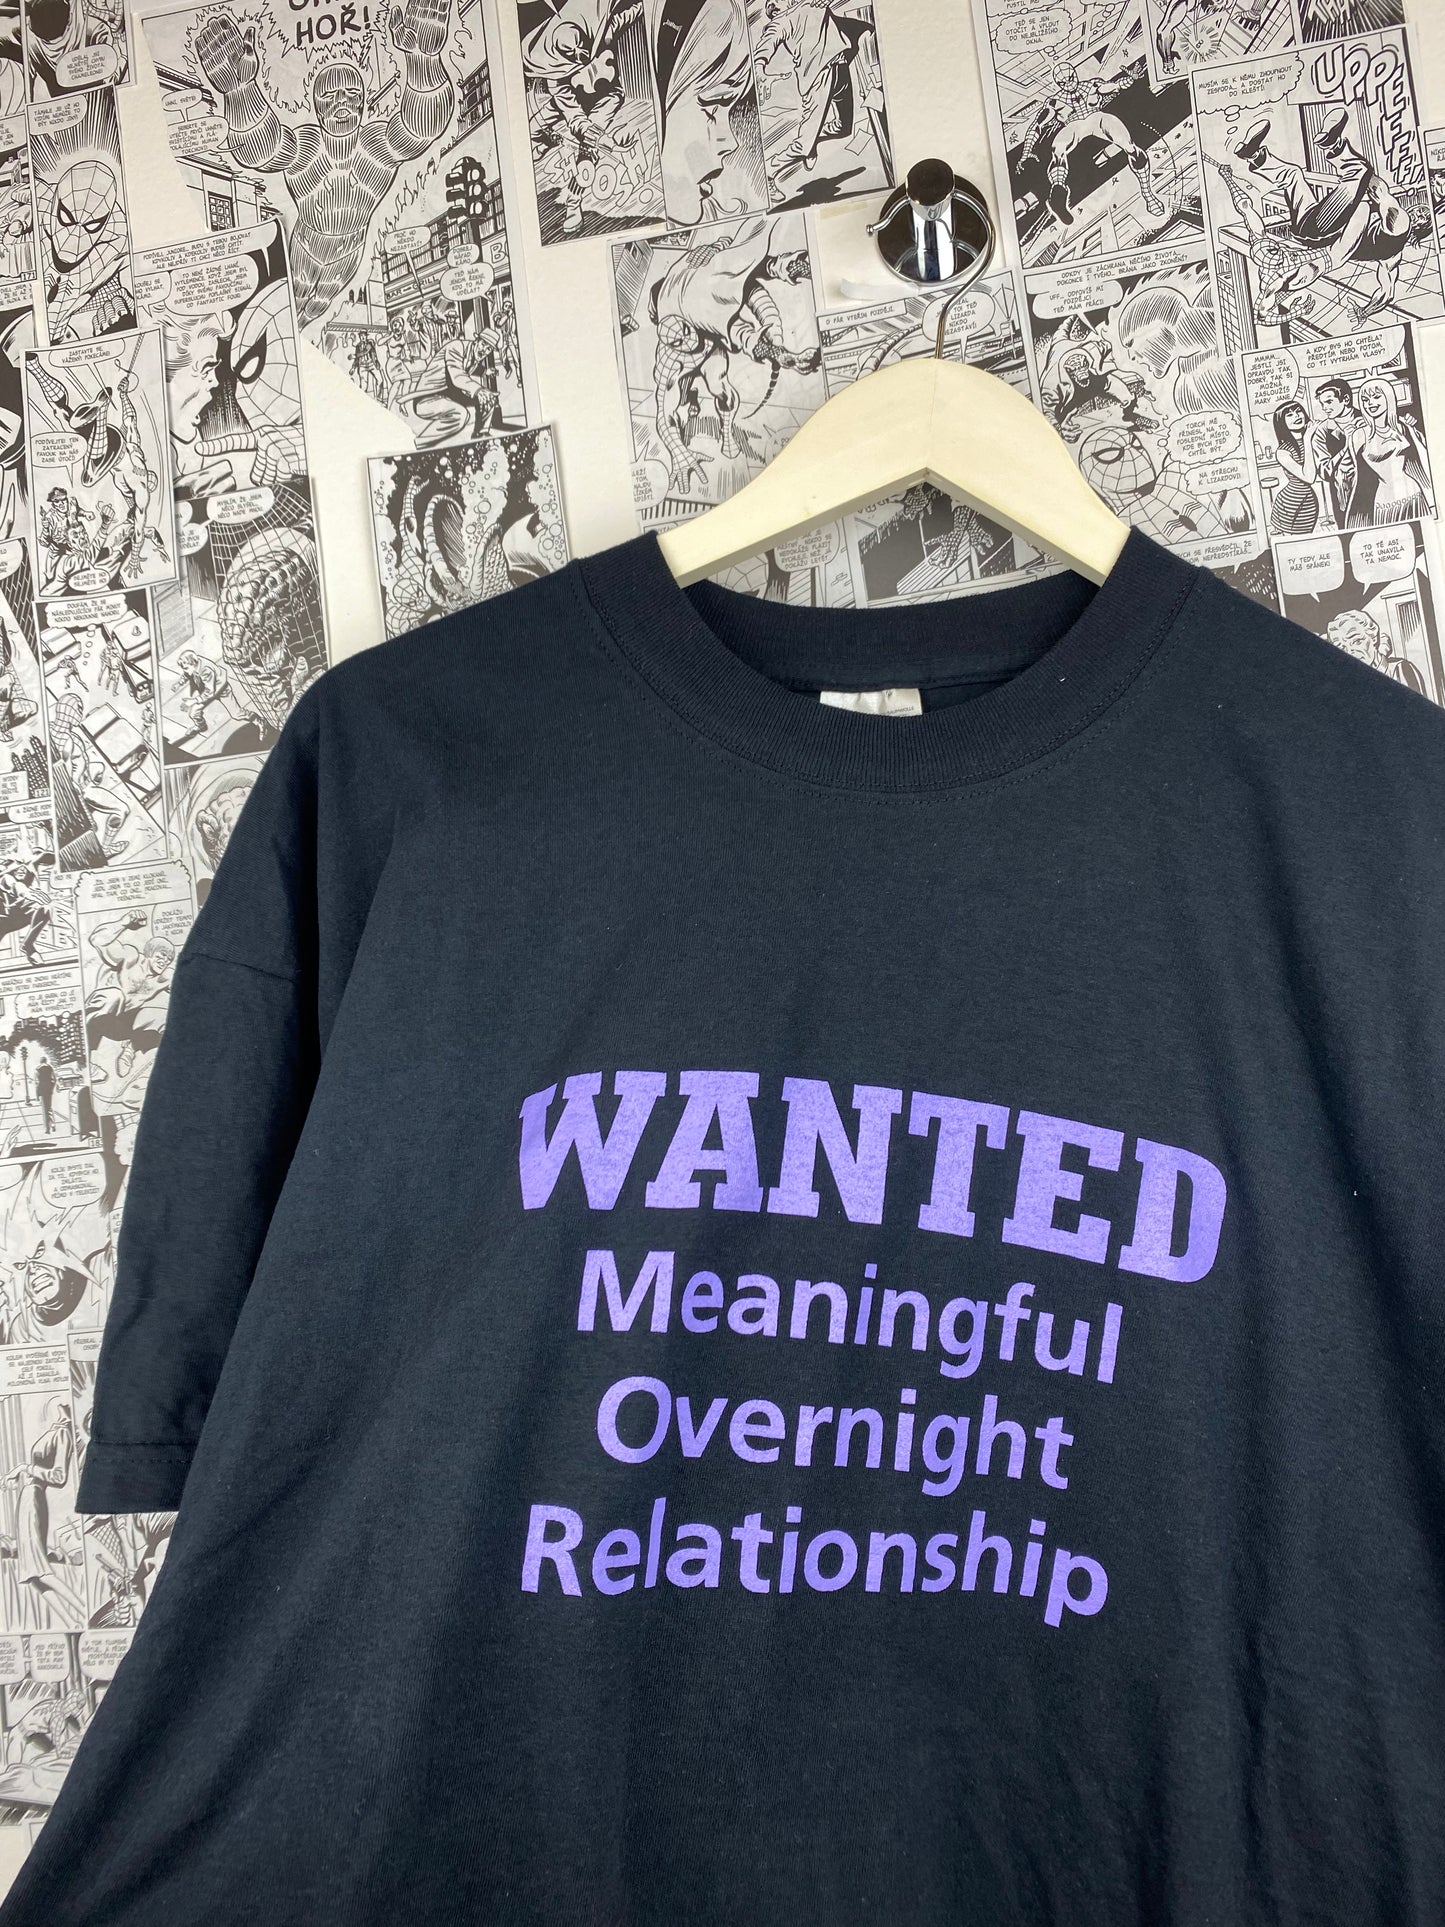 Vintage “Meaningfull Overnight Relationship” 90s t-shirt - size XL